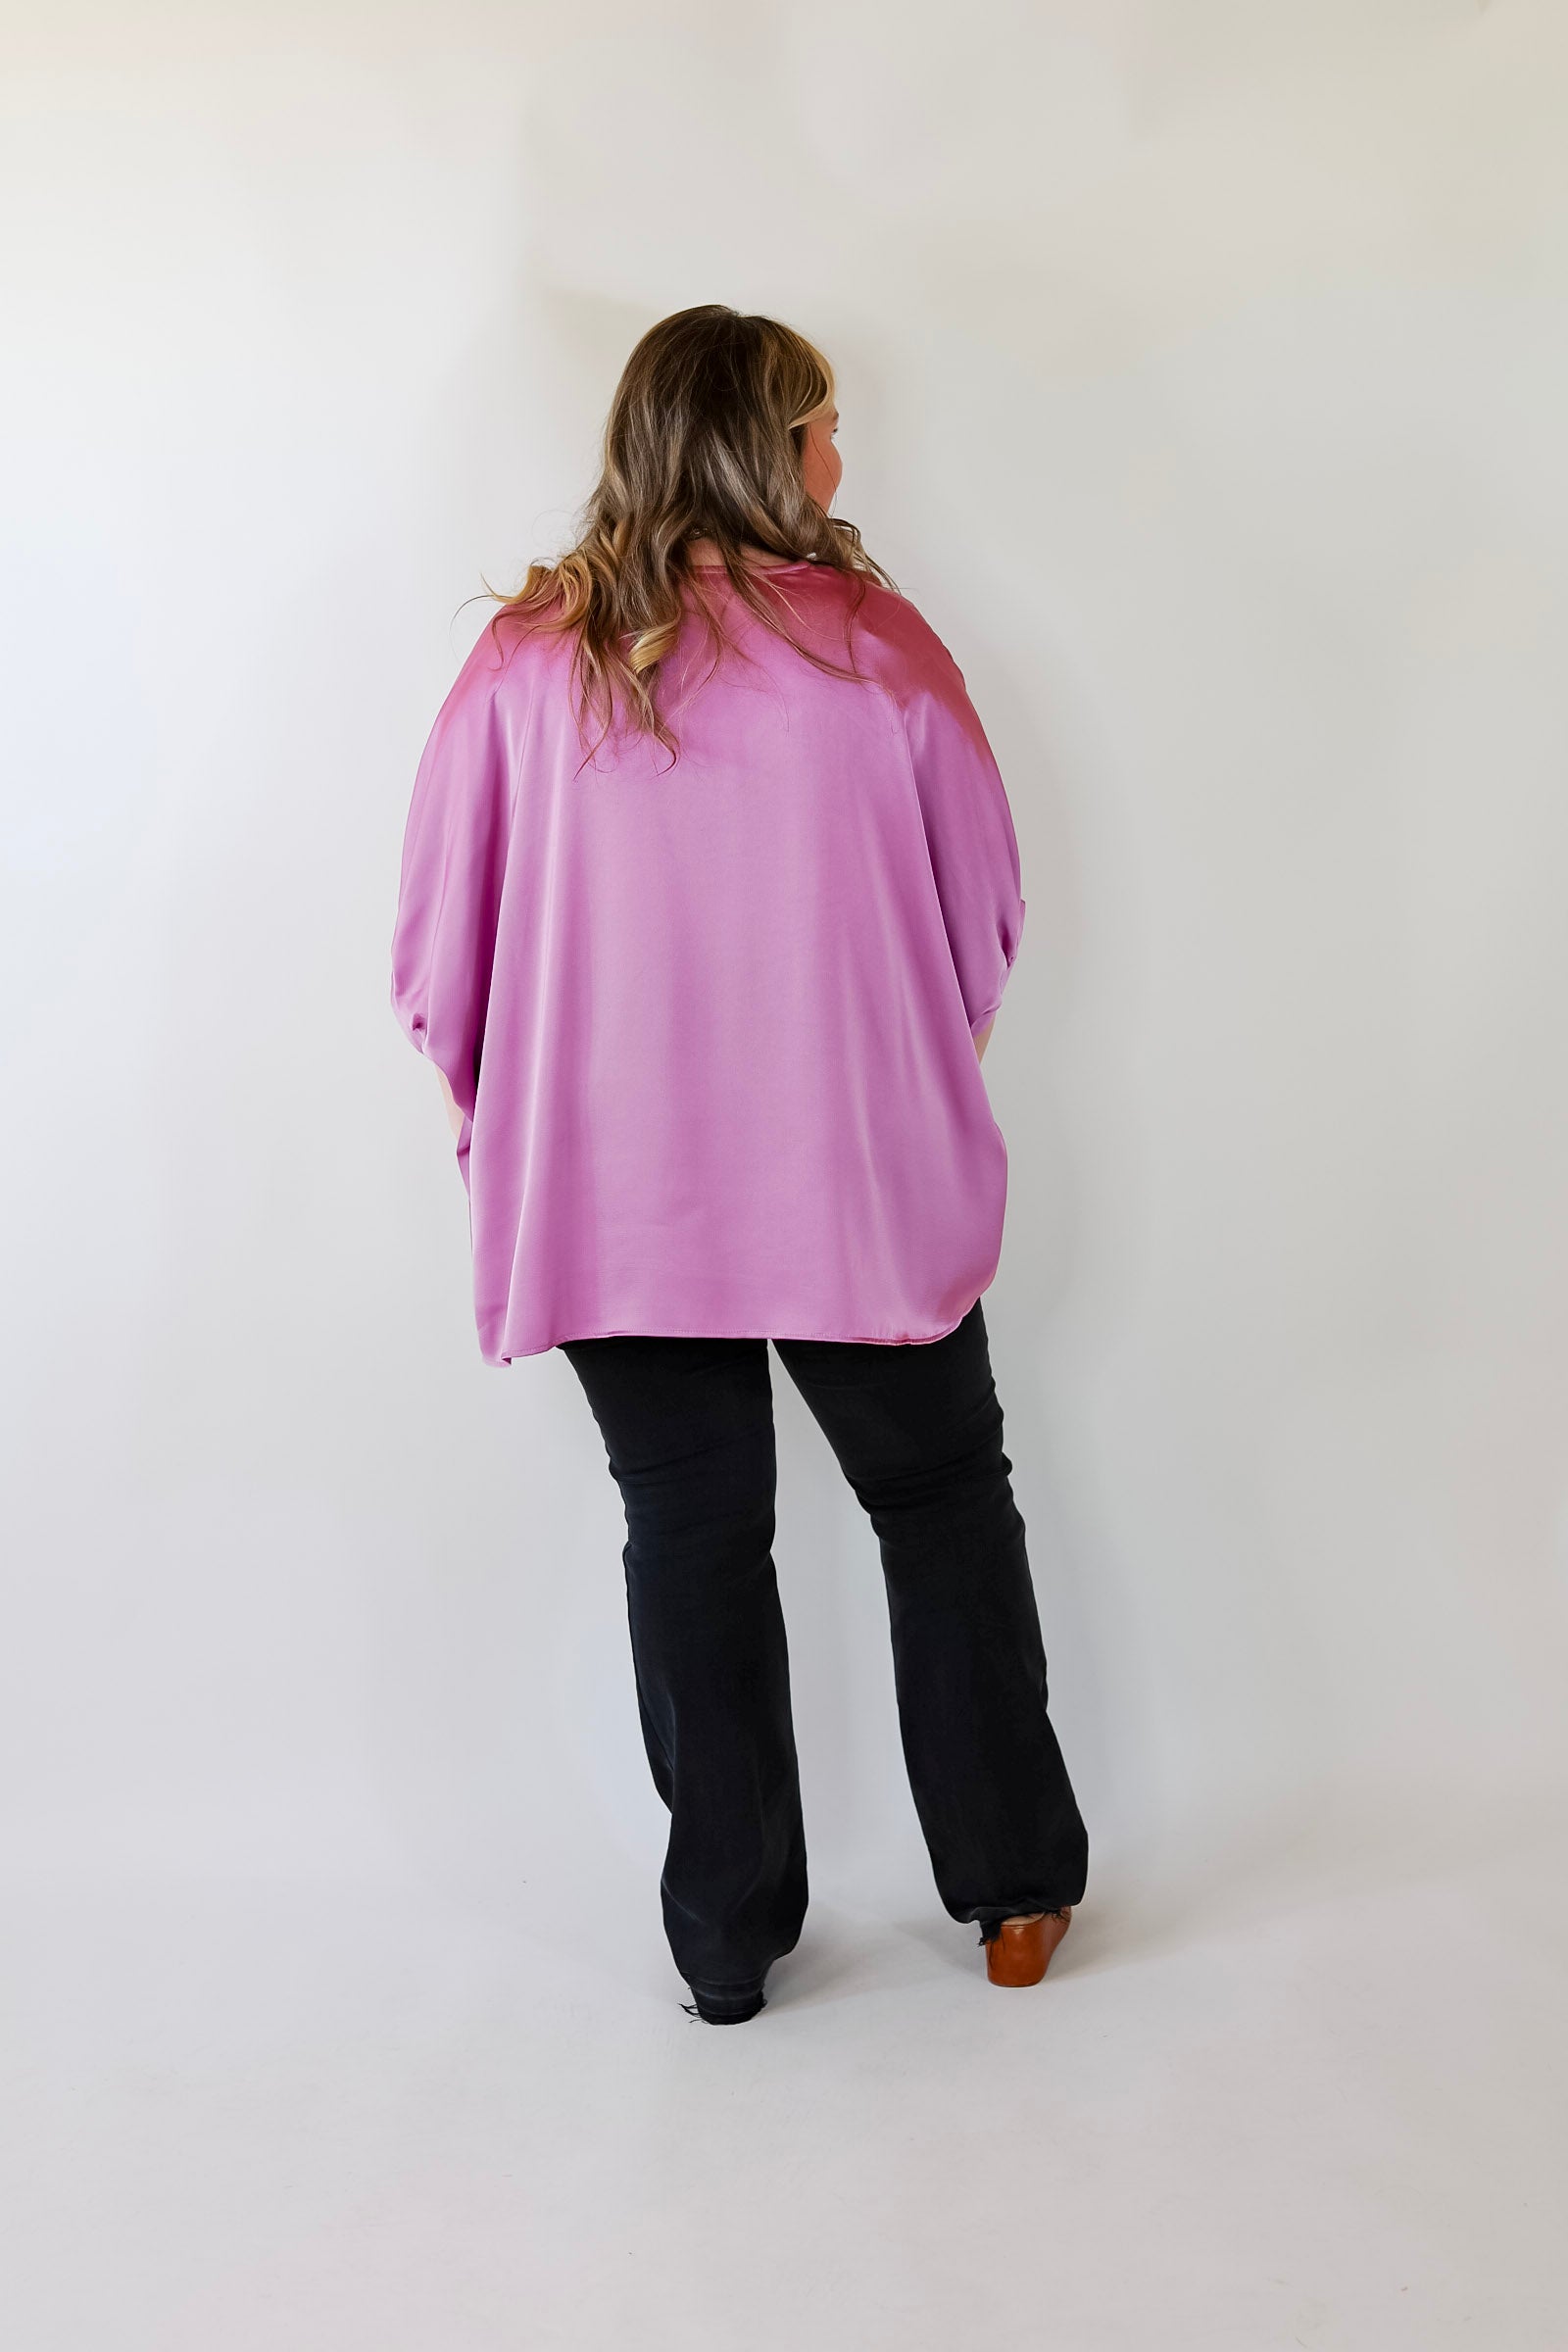 Irresistibly Chic Half Sleeve Oversized Blouse in Mauve Purple - Giddy Up Glamour Boutique